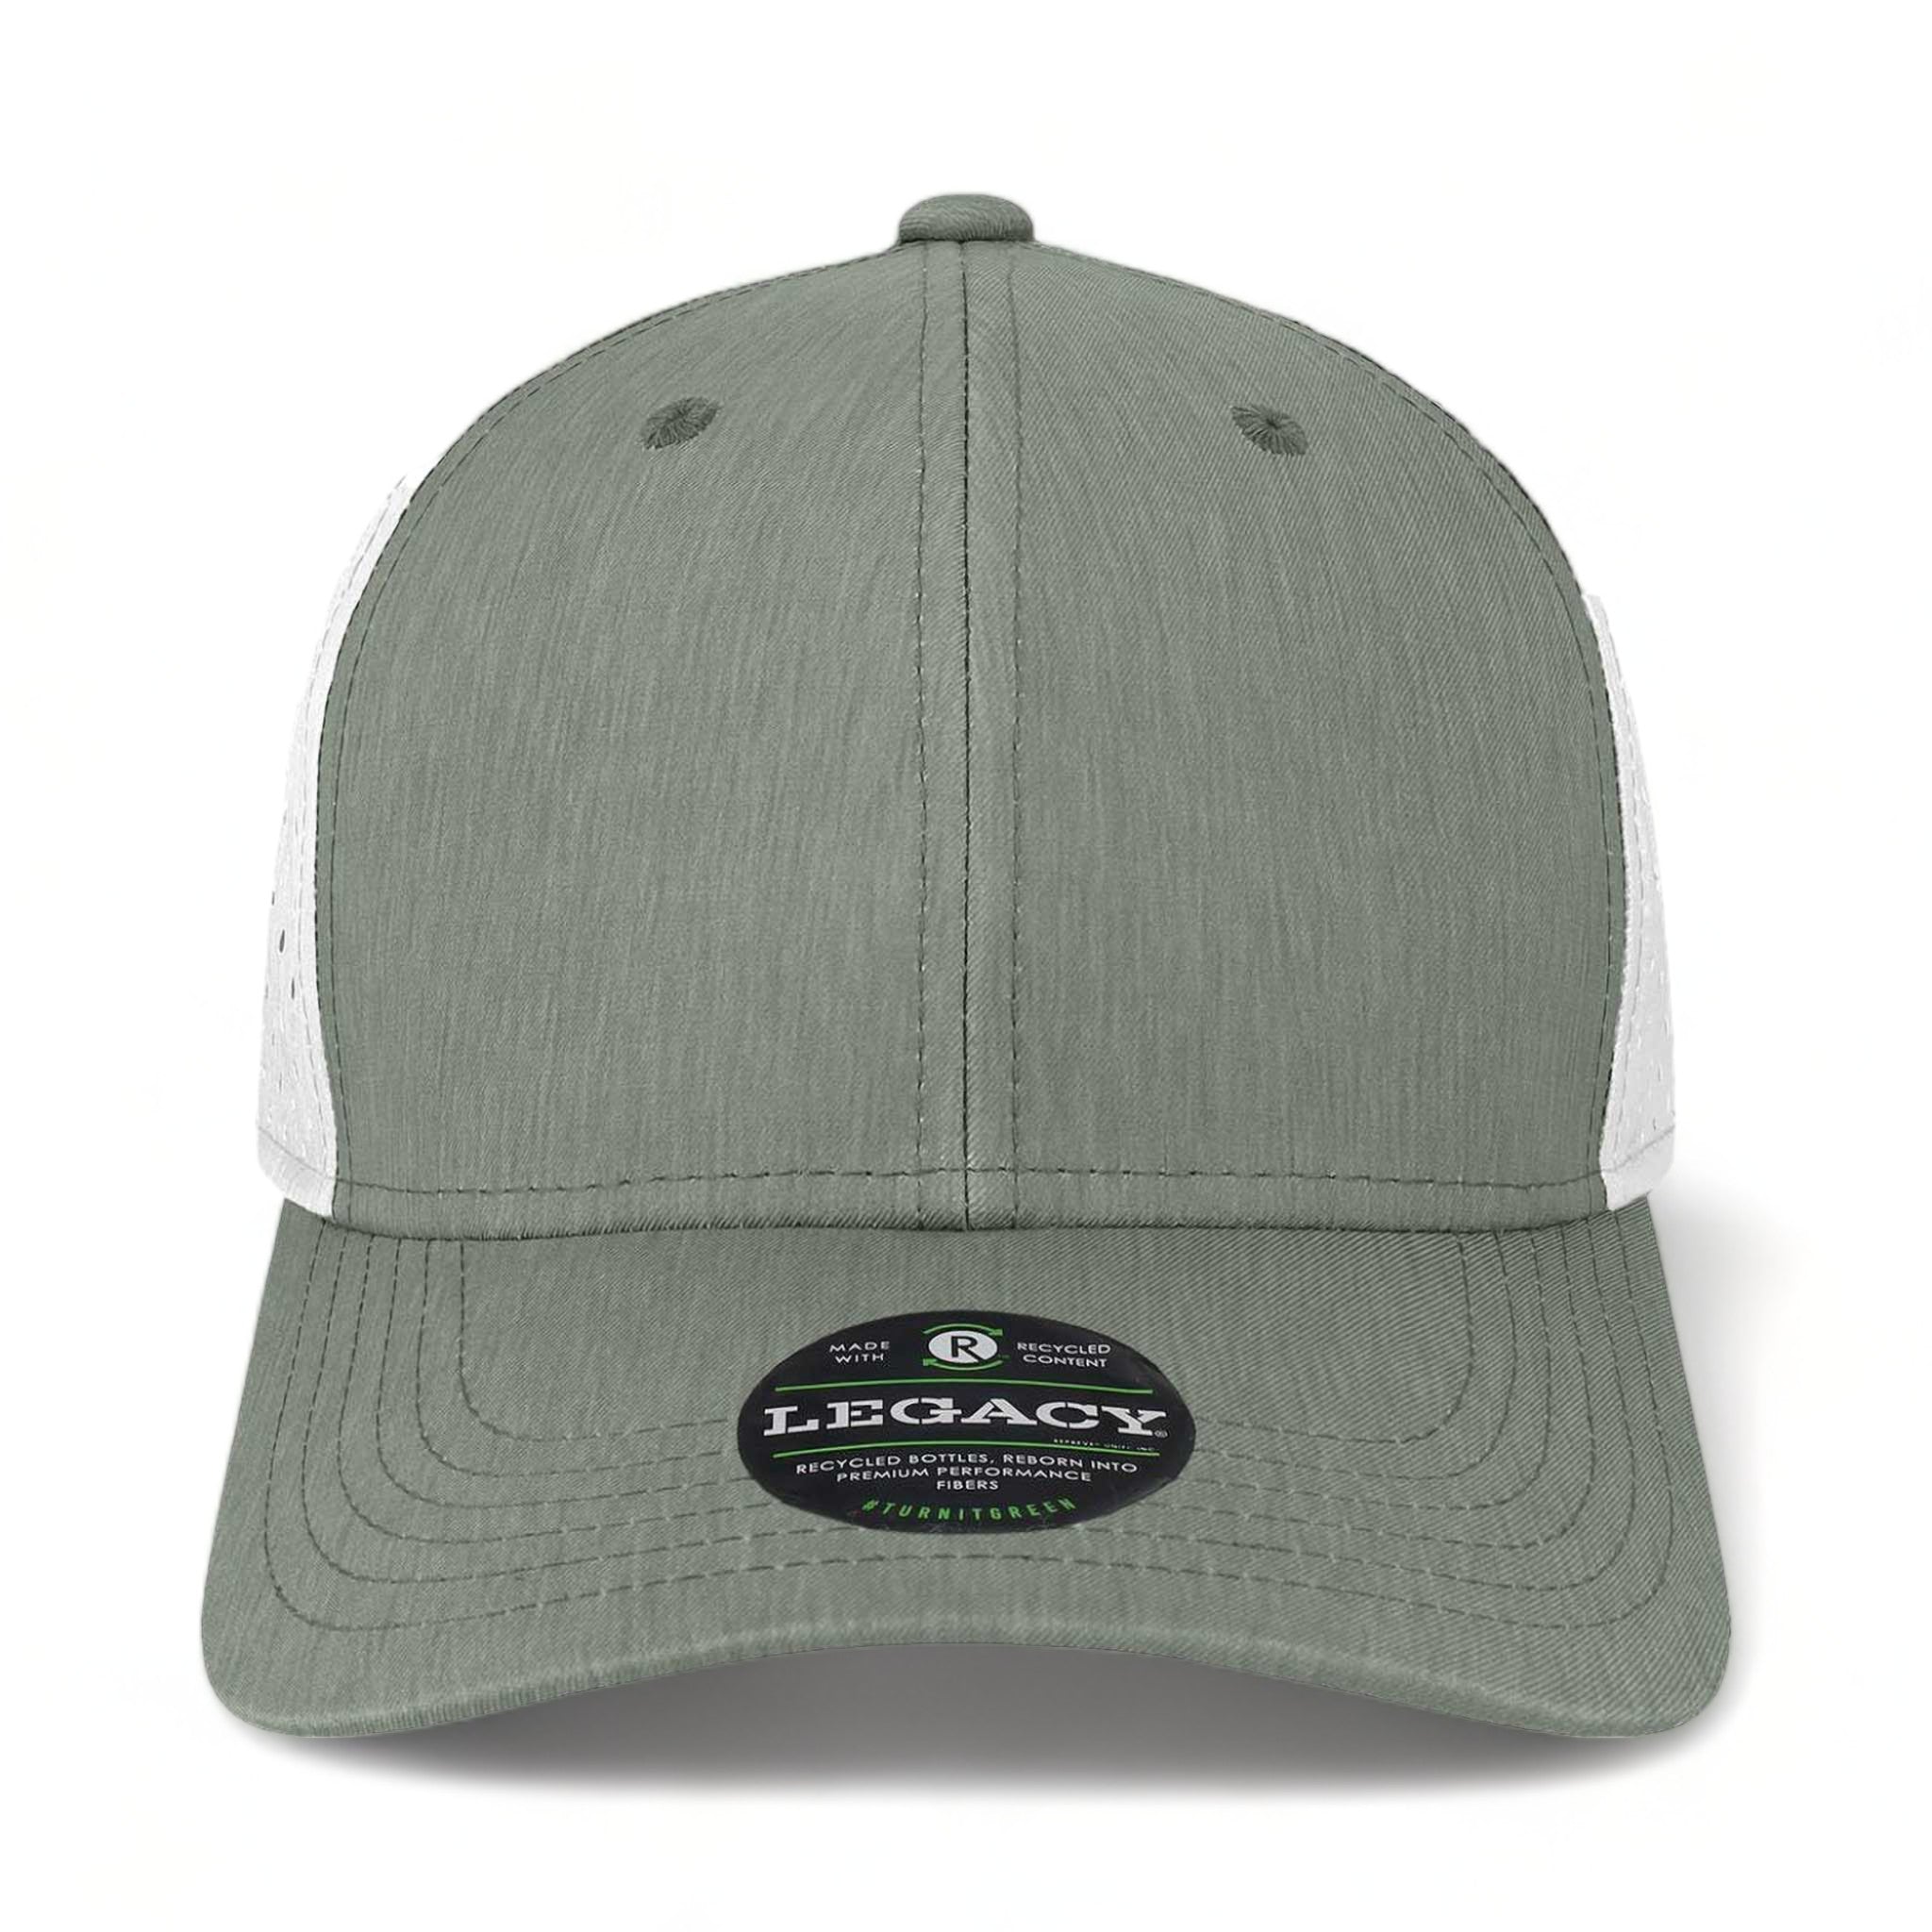 Front view of LEGACY REMPA custom hat in eco dark grey and white